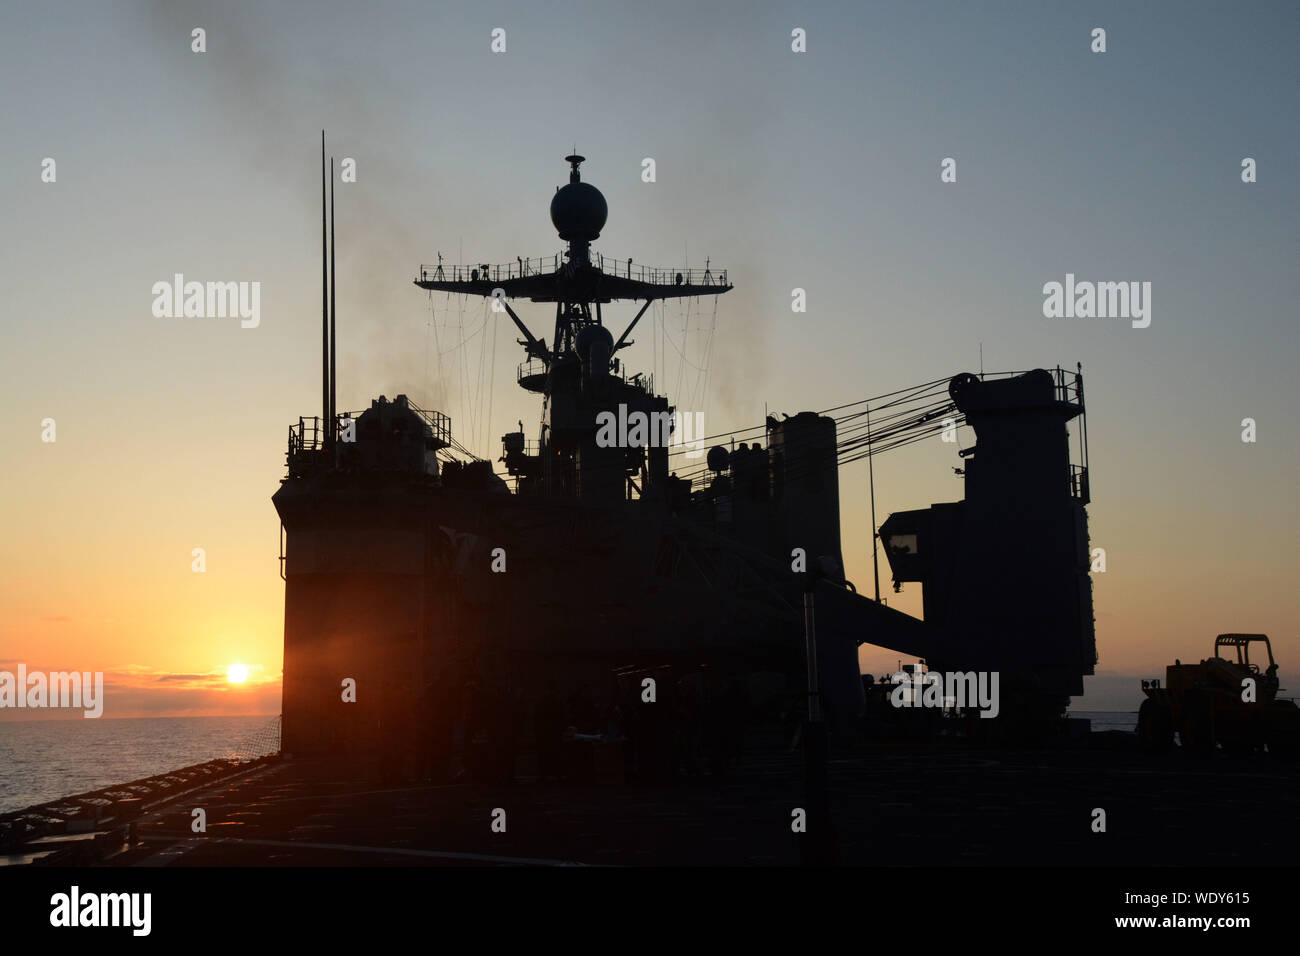 190824-N-XN177-0147 PACIFIC OCEAN (Aug. 24, 2019) – The dock landing ship USS Comstock (LSD 45) steams through the Pacific Ocean while conducting routine operations. This year USS Comstock will participate in the U.S. Navy Fleet Weeks in Los Angeles and San Francisco. (U.S. Navy Photo by Mass Communication Specialist 1st Class Peter Burghart/Released) Stock Photo